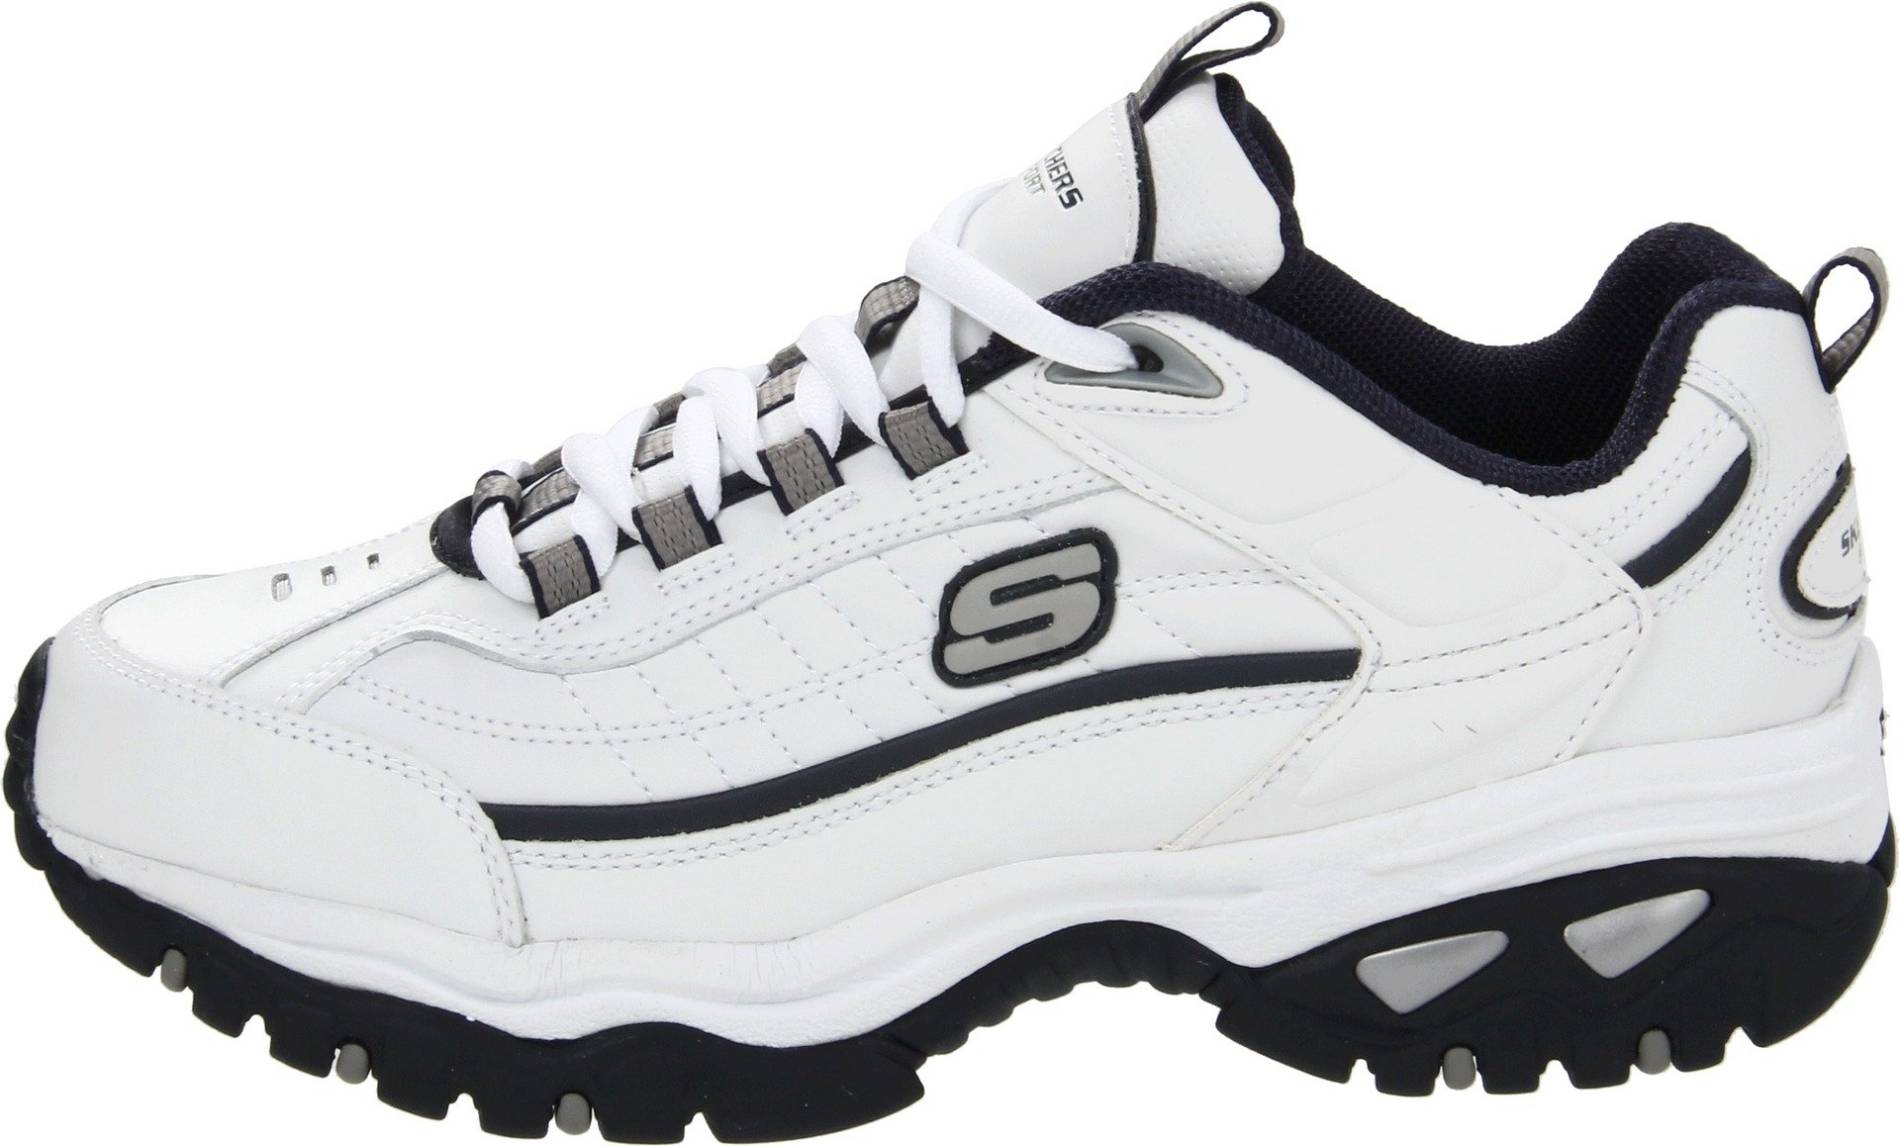 skechers shoes highest price